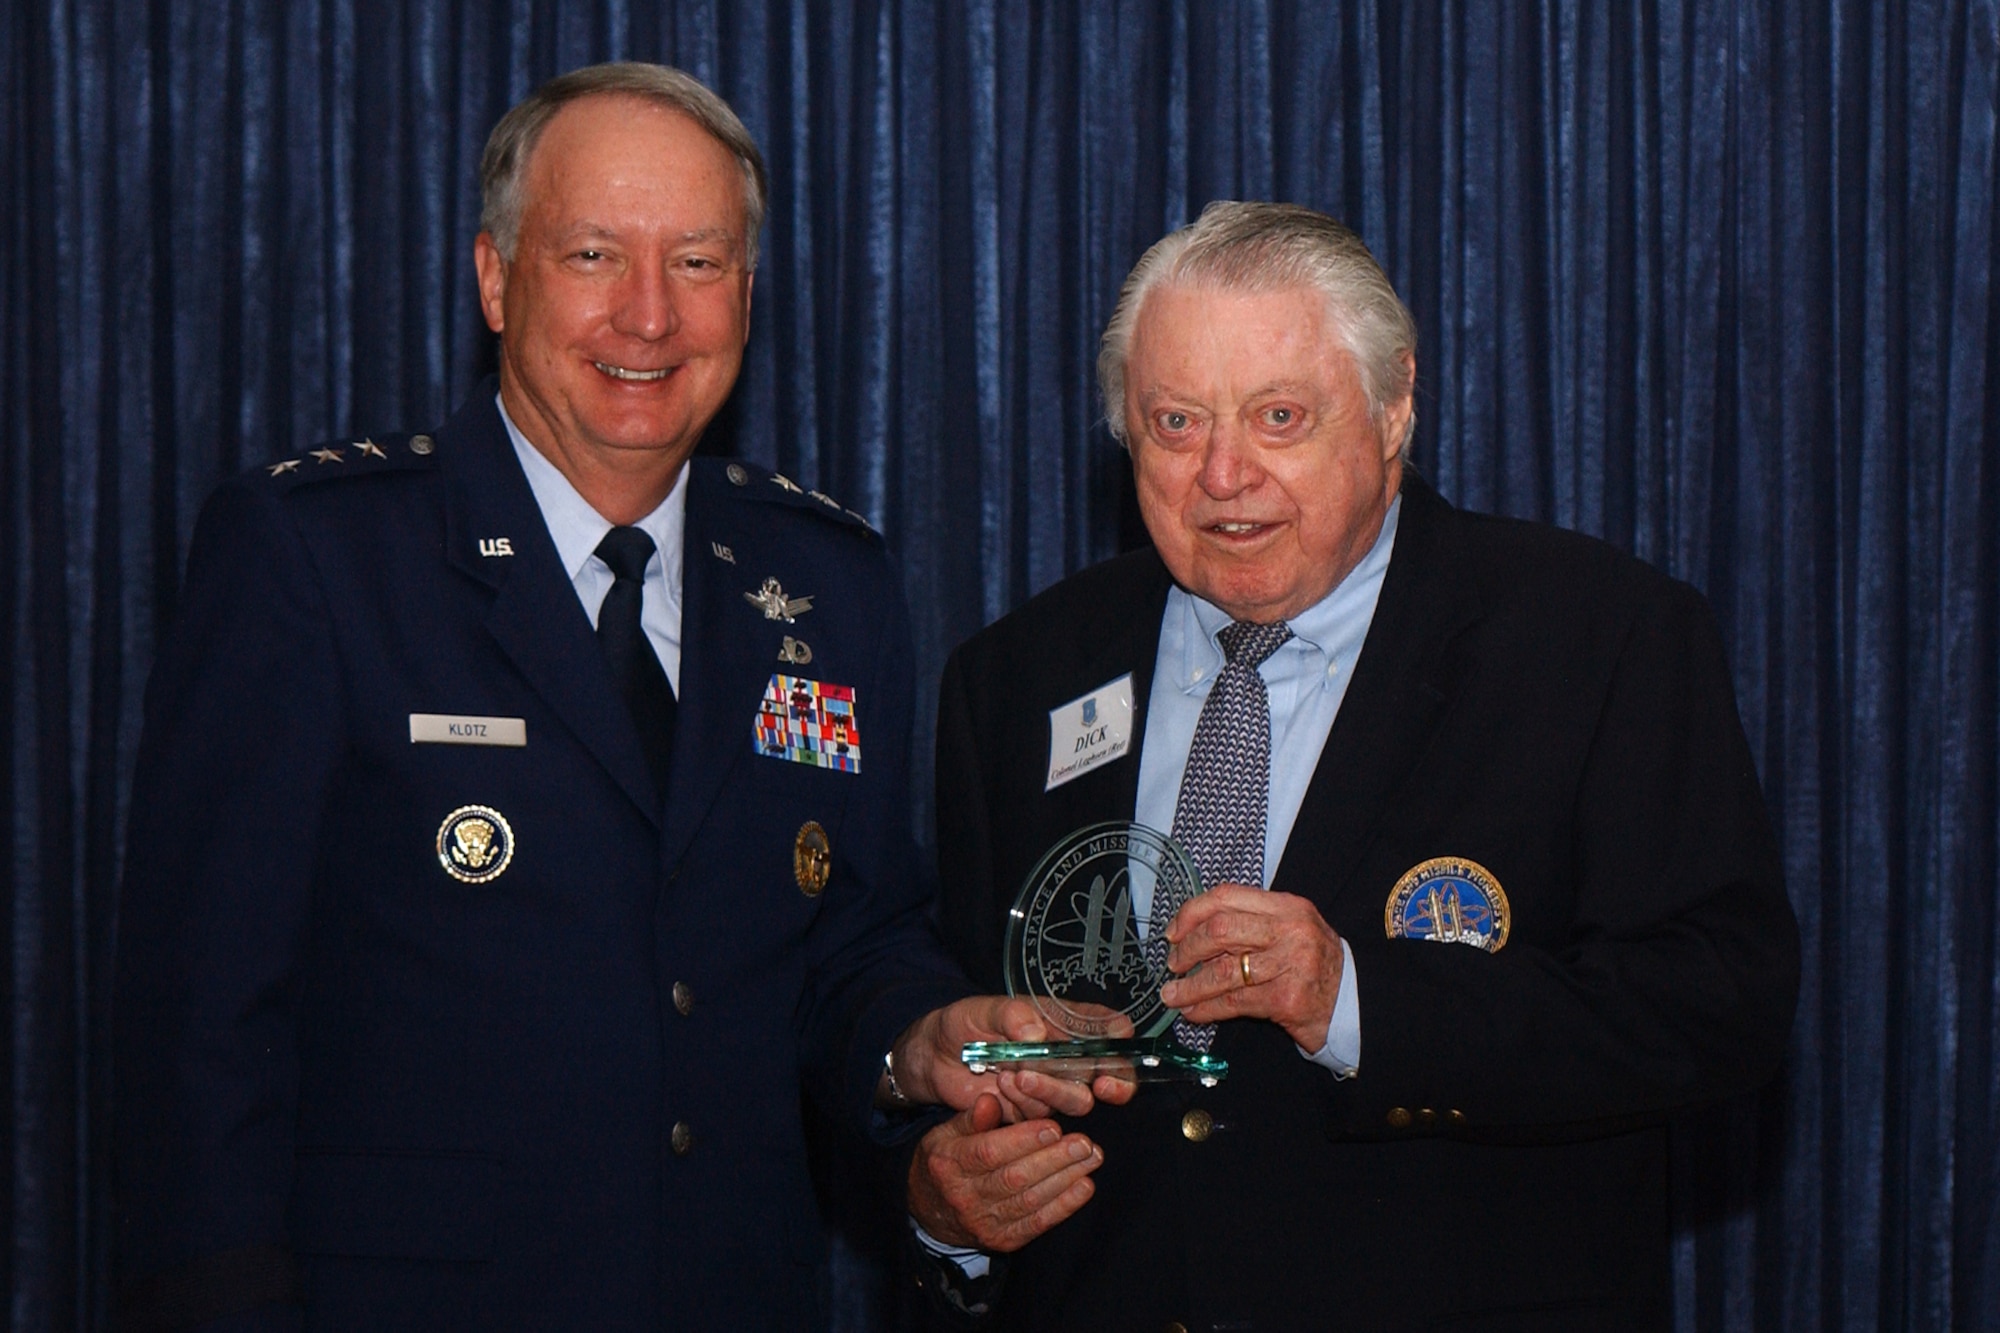 Retired Col. Richard S. Leghorn, Air Force Reserve, accepts his Air Force Space and Missile Pioneers Hall of Fame award Aug. 24 from Lt. Gen. Frank G. Klotz, vice commander, Air Force Space Command, Peterson Air Force Base, Colo. (U.S. Air Force photo by Duncan Wood)                   